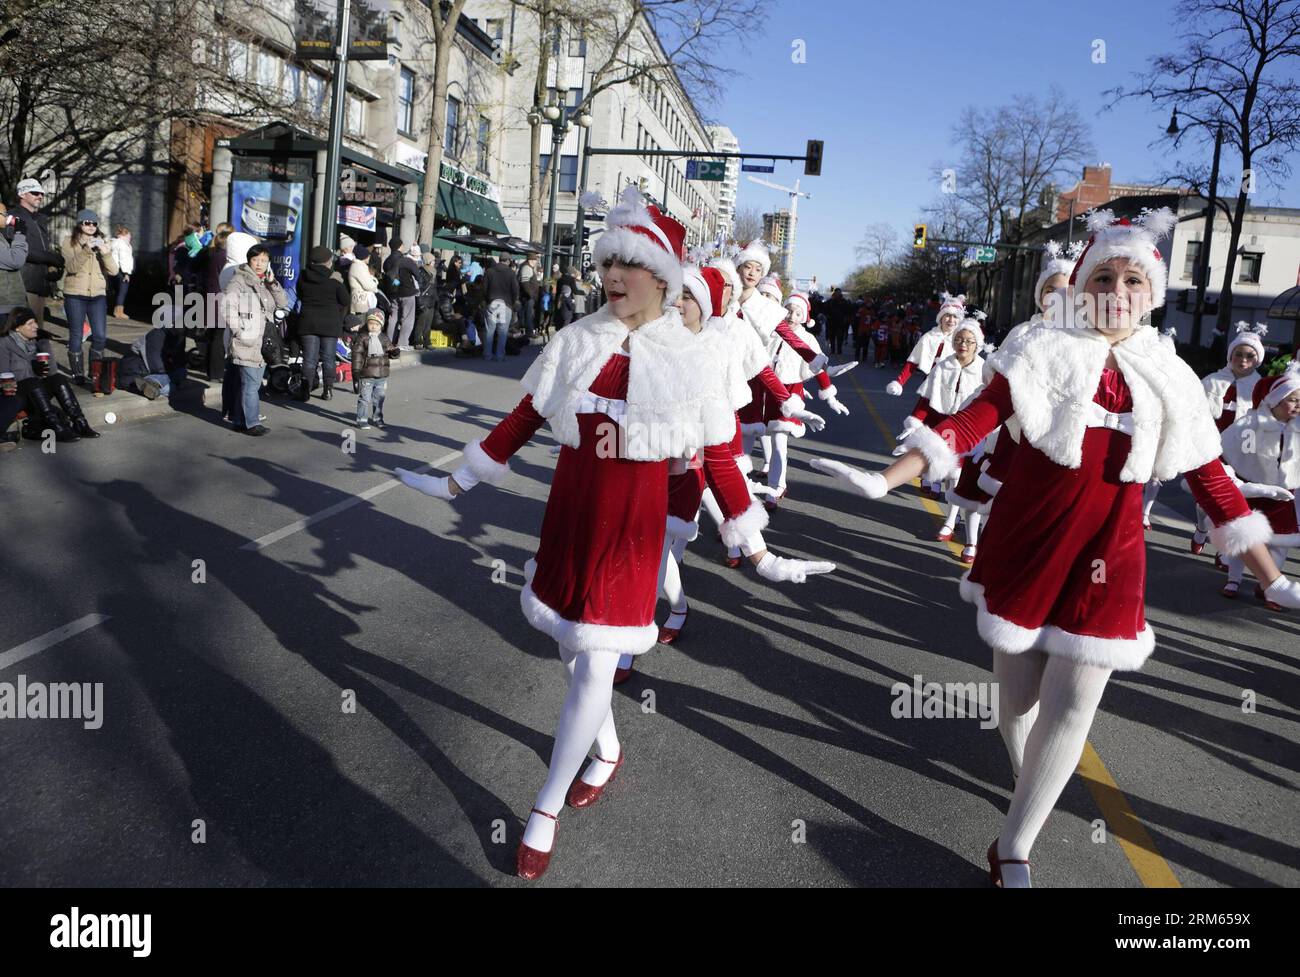 Bildnummer: 60806629  Datum: 07.12.2013  Copyright: imago/Xinhua     Participants dance during the 25th Christmas parade in downtown New Westminster, Canada, Dec. 7, 2013. More than 50 groups attended the parade on Saturday. (Xinhua/Liang Sen) CANADA-VANCOUVER-CHRISTMAS PARADE PUBLICATIONxNOTxINxCHN xcb x0x 2013 quer Stock Photo